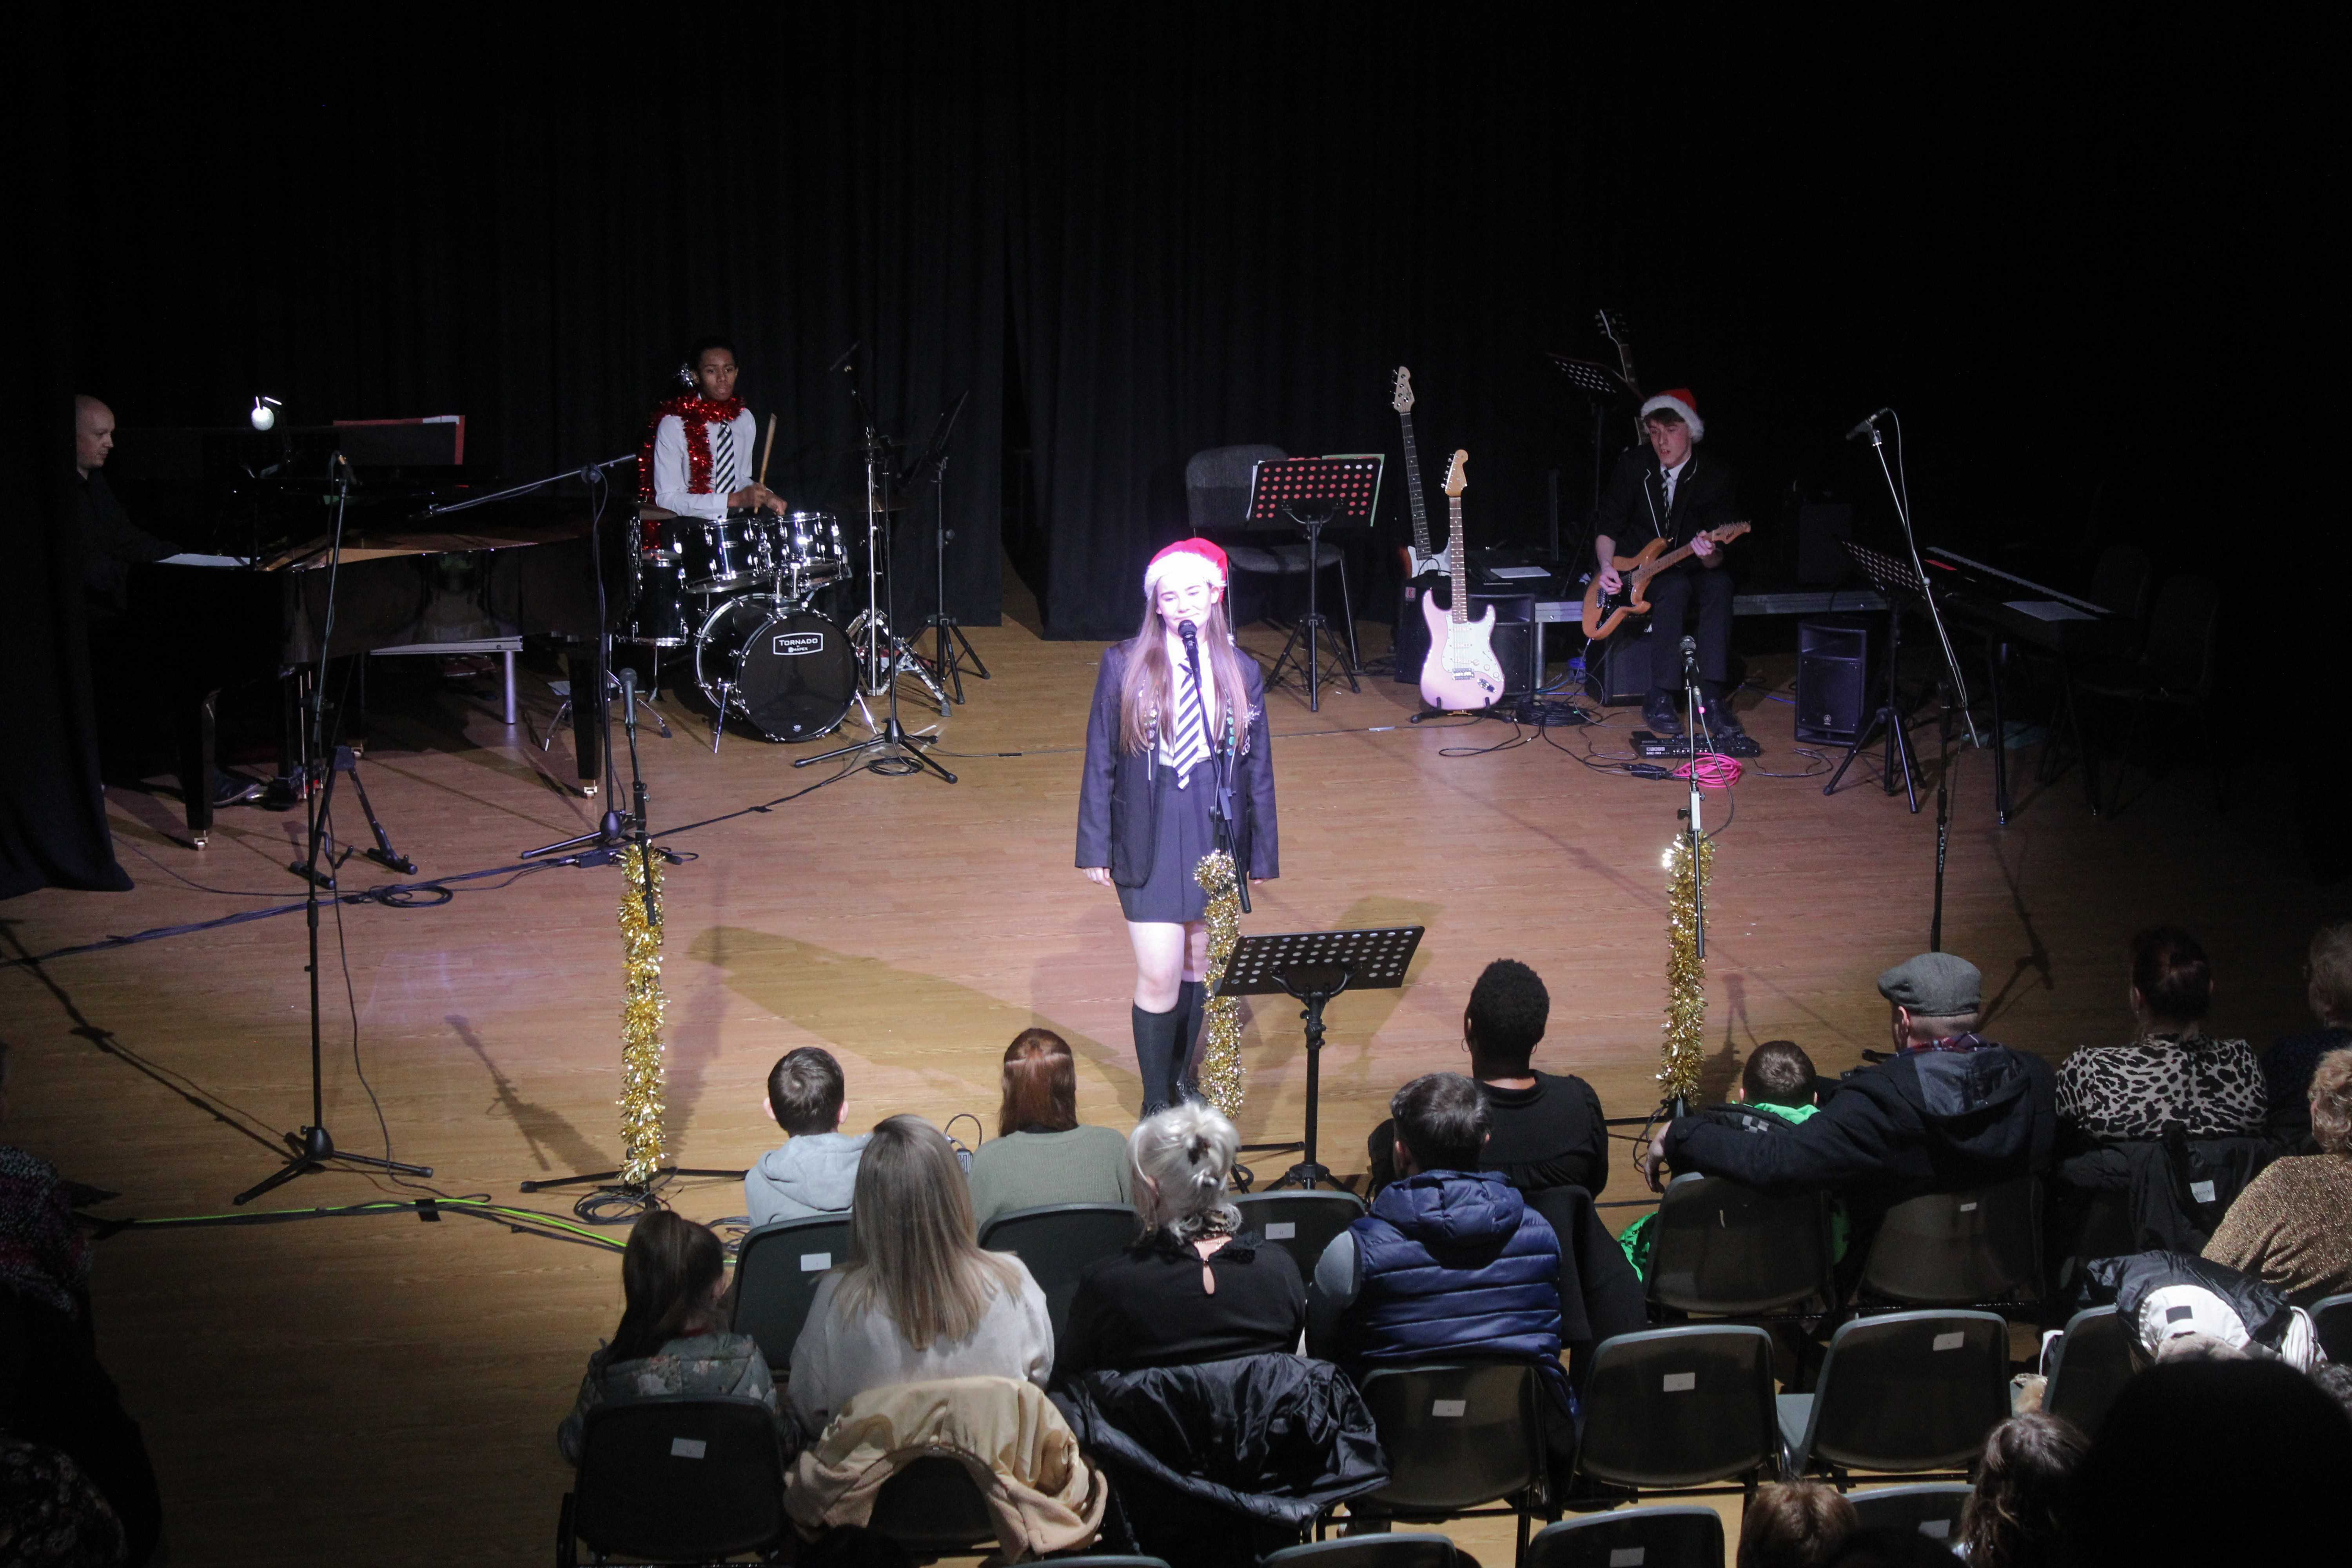 Students perform in a band wearing Christmas hats at Laurus Ryecroft Winter Wonderland 2023